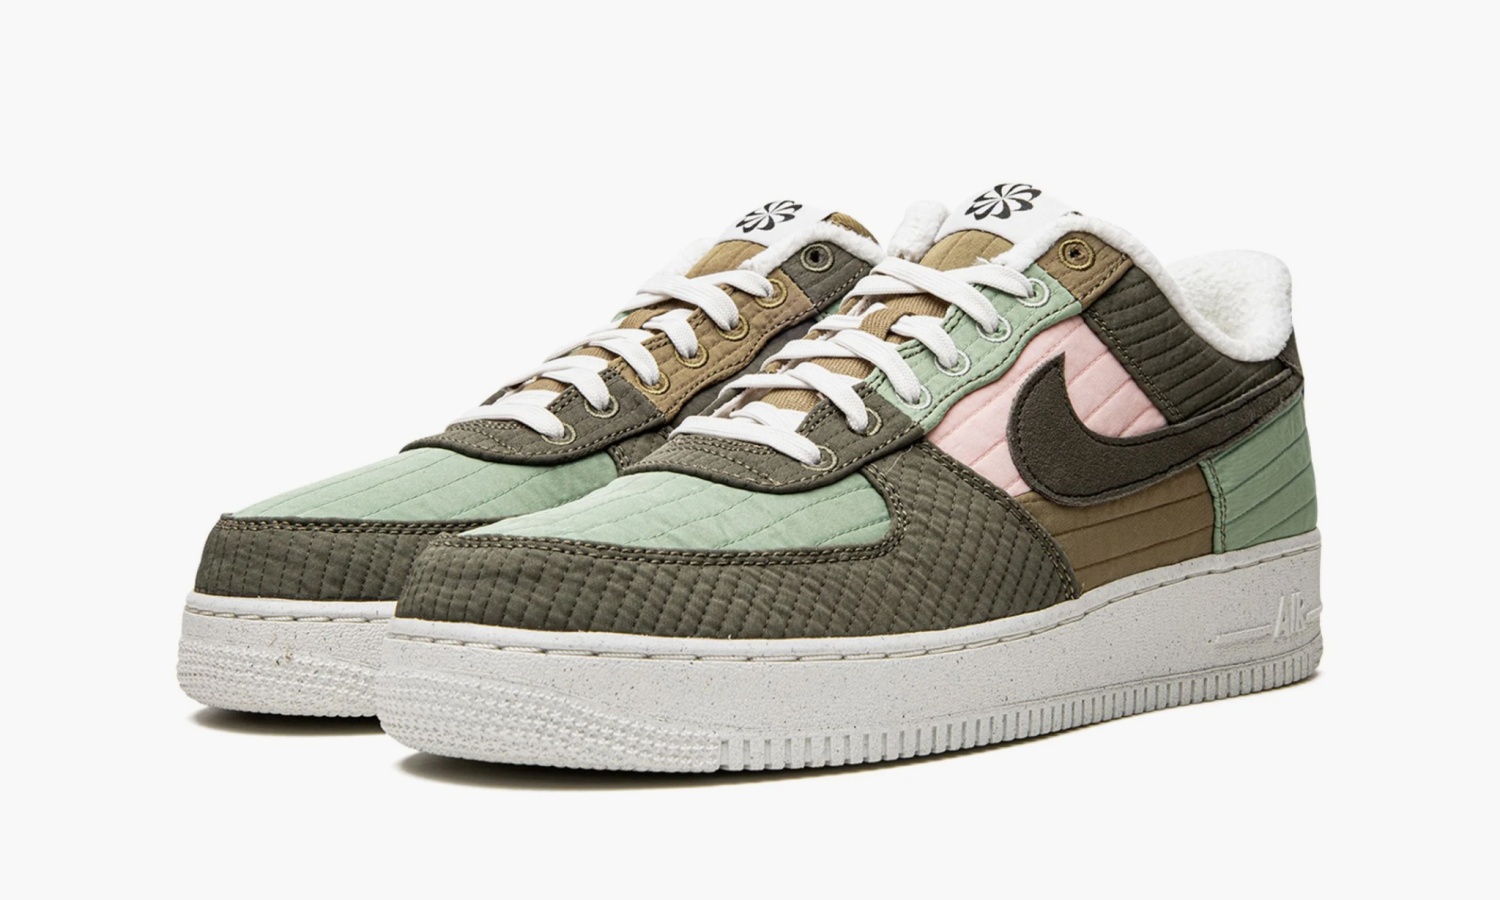 фото Nike Air Force 1 Low 07 LX "Toasty Oil Green" (Nike Air Force 1)-DC8744 300